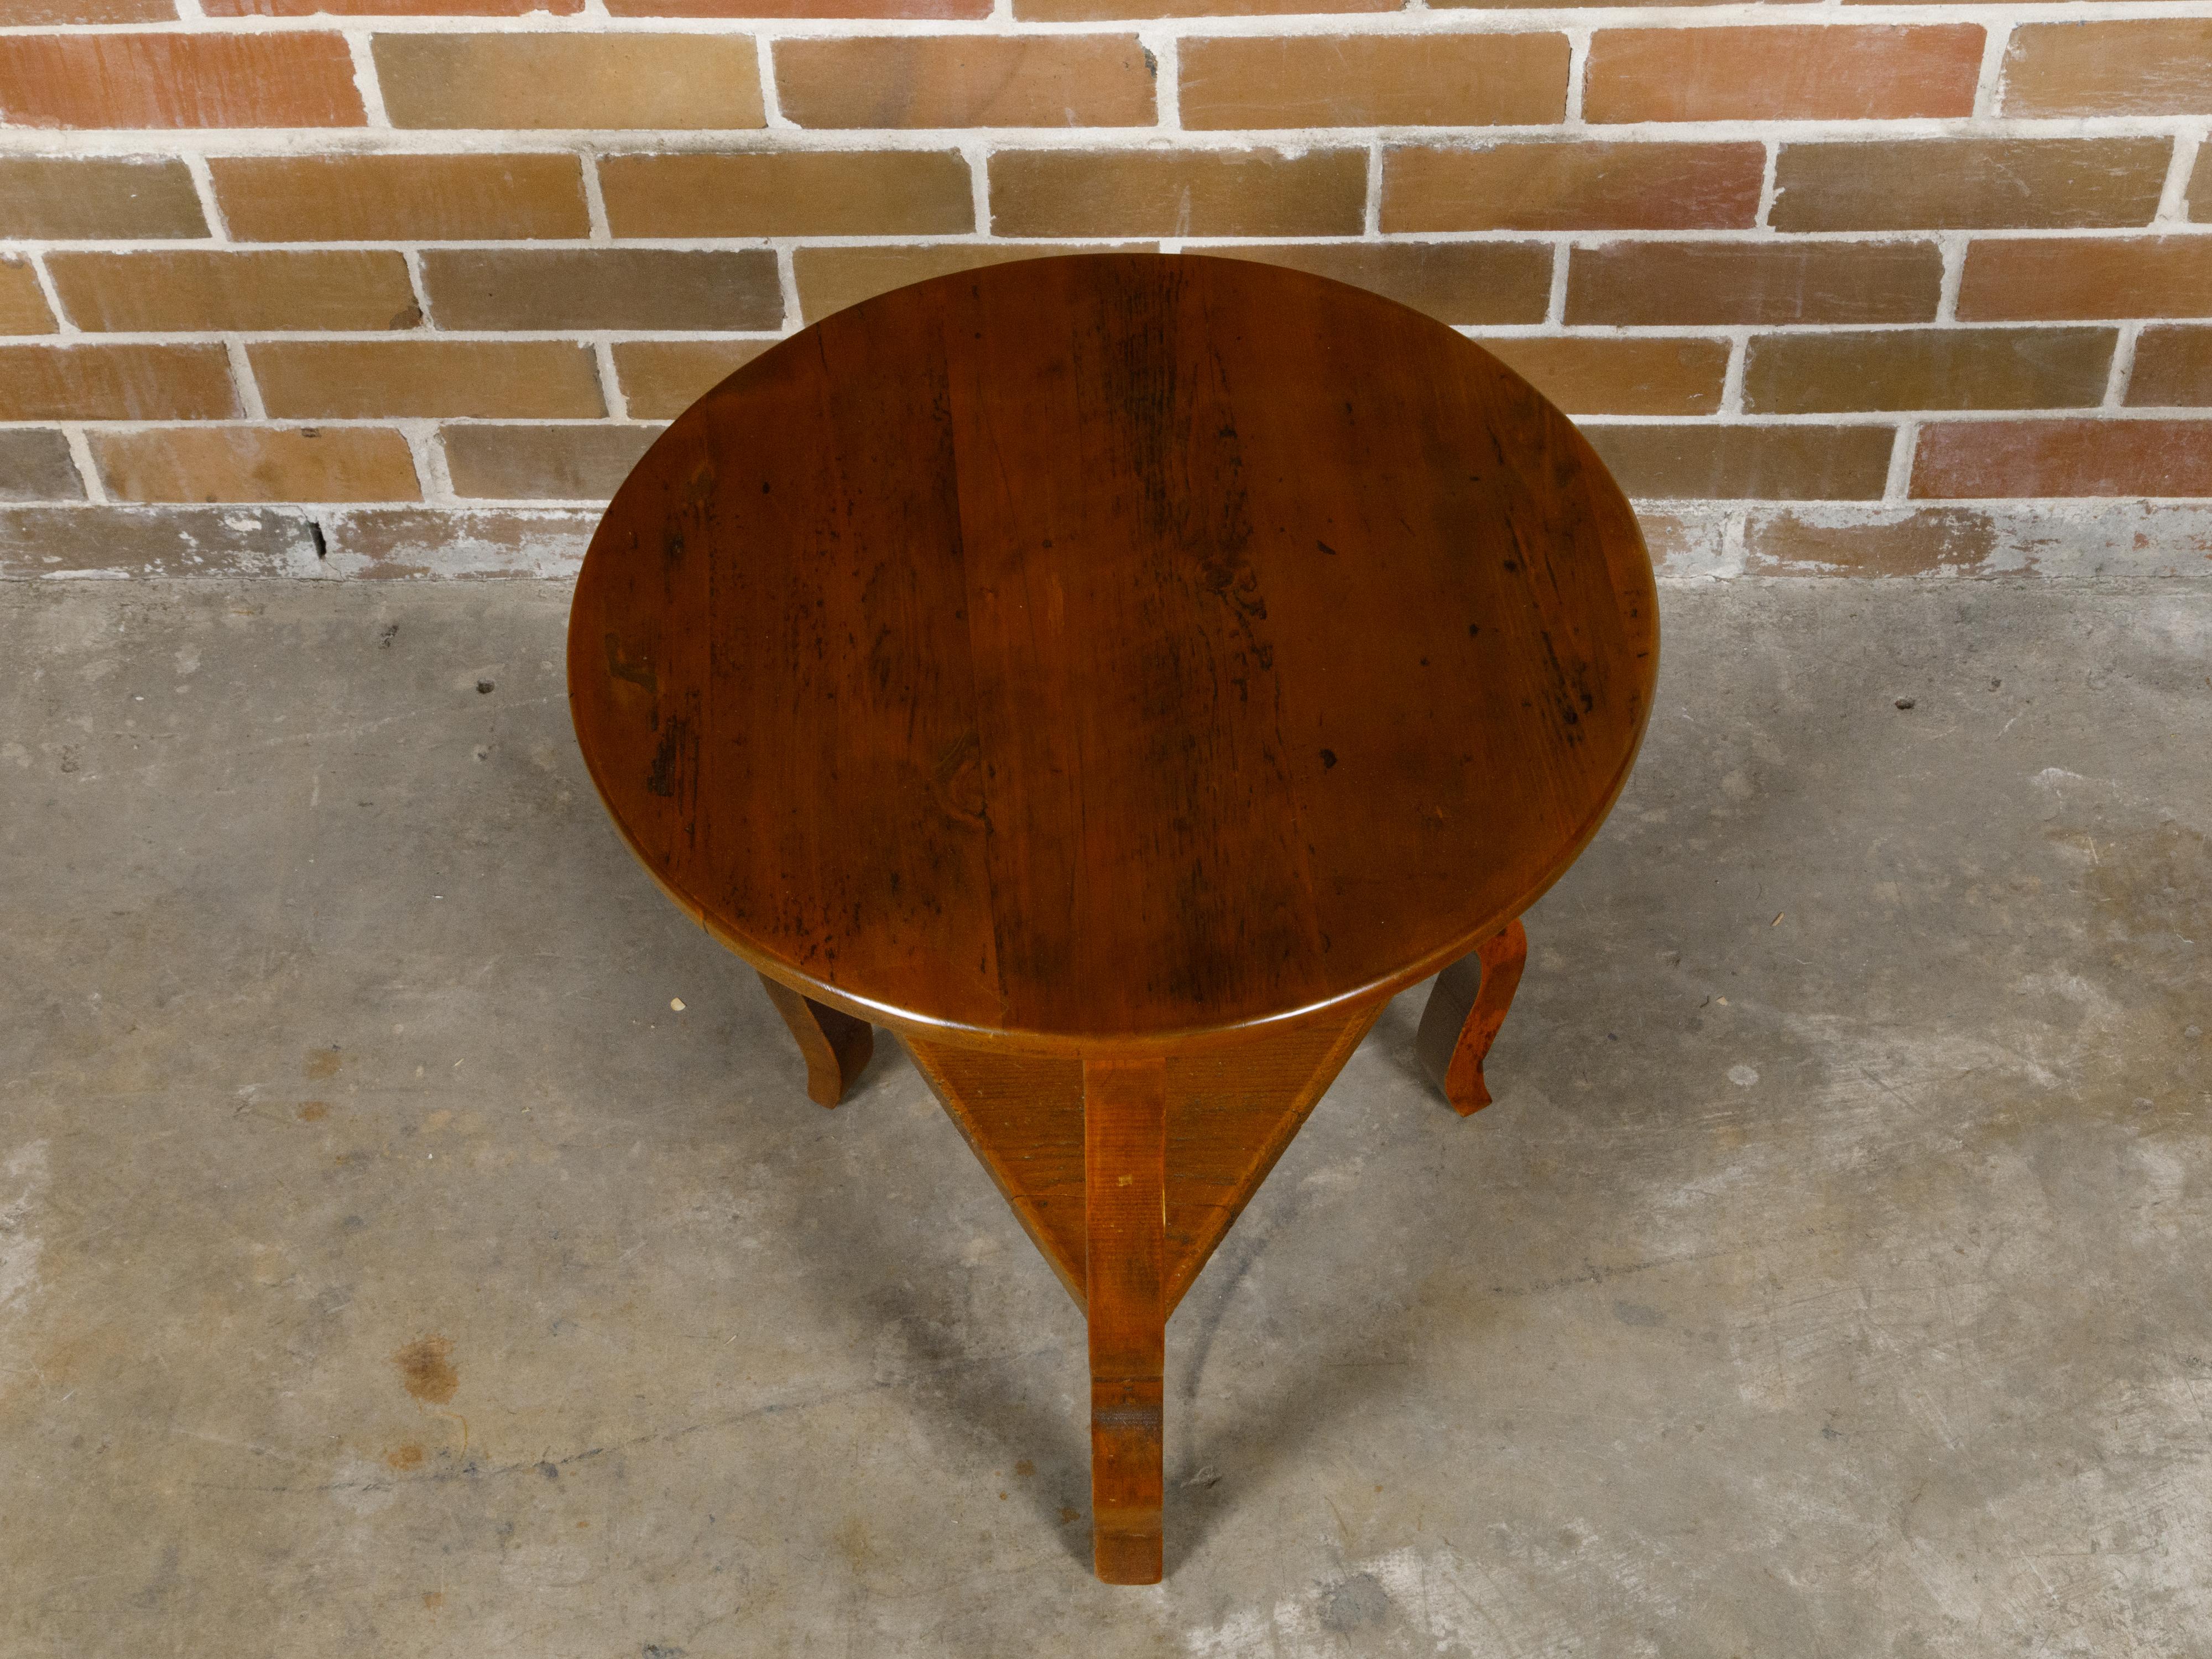 English Pine Side Table with Circular Top, Curving Legs and Triangular Shelf For Sale 3